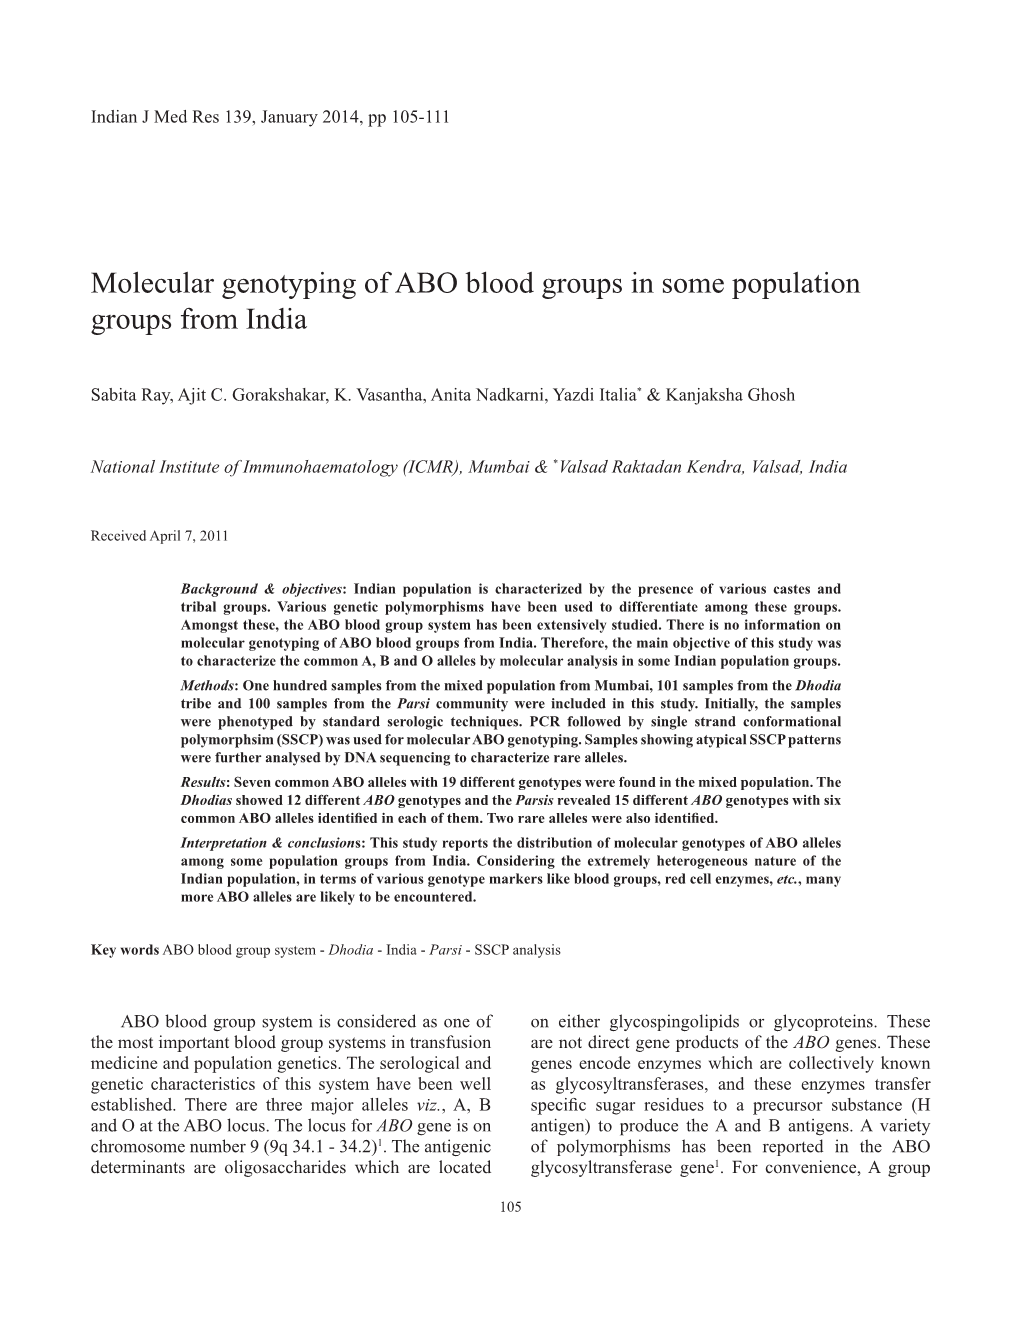 Molecular Genotyping of ABO Blood Groups in Some Population Groups from India